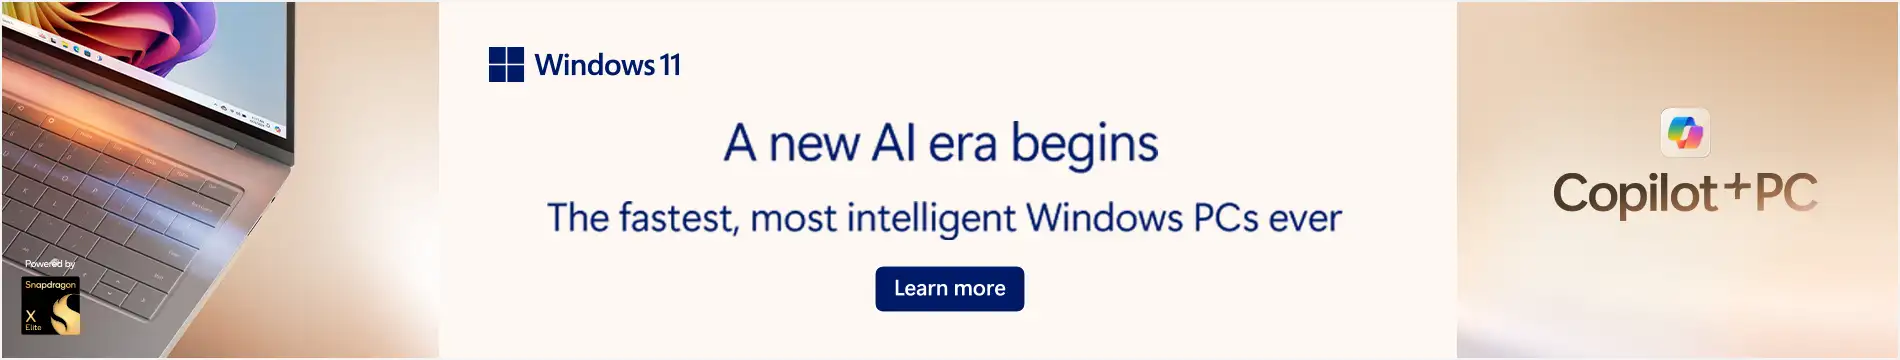 Copilot+ PC - A New AI Era Begins - The fastest, most intelligent Windows PC ever. Learn More